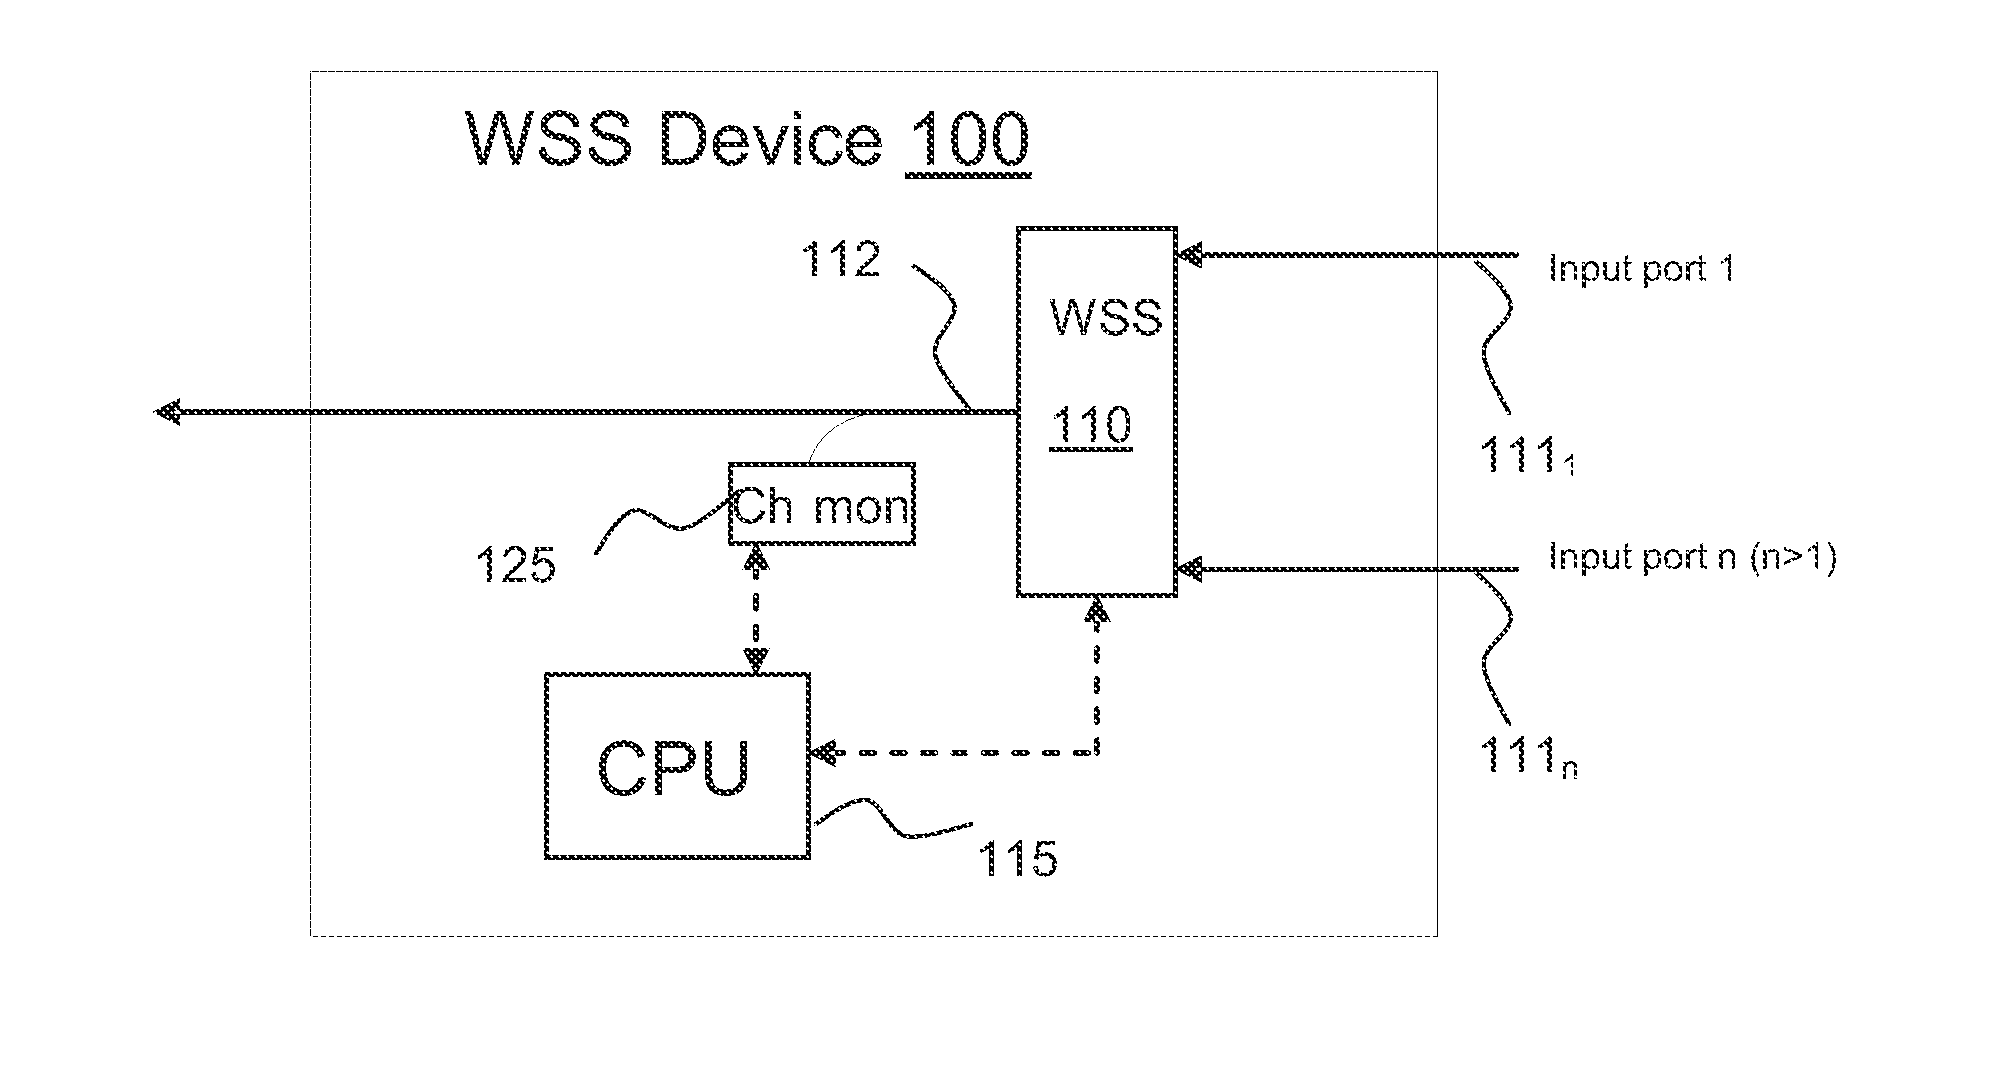 Method for auto-configuration of a wavelength selective switch in an optical network